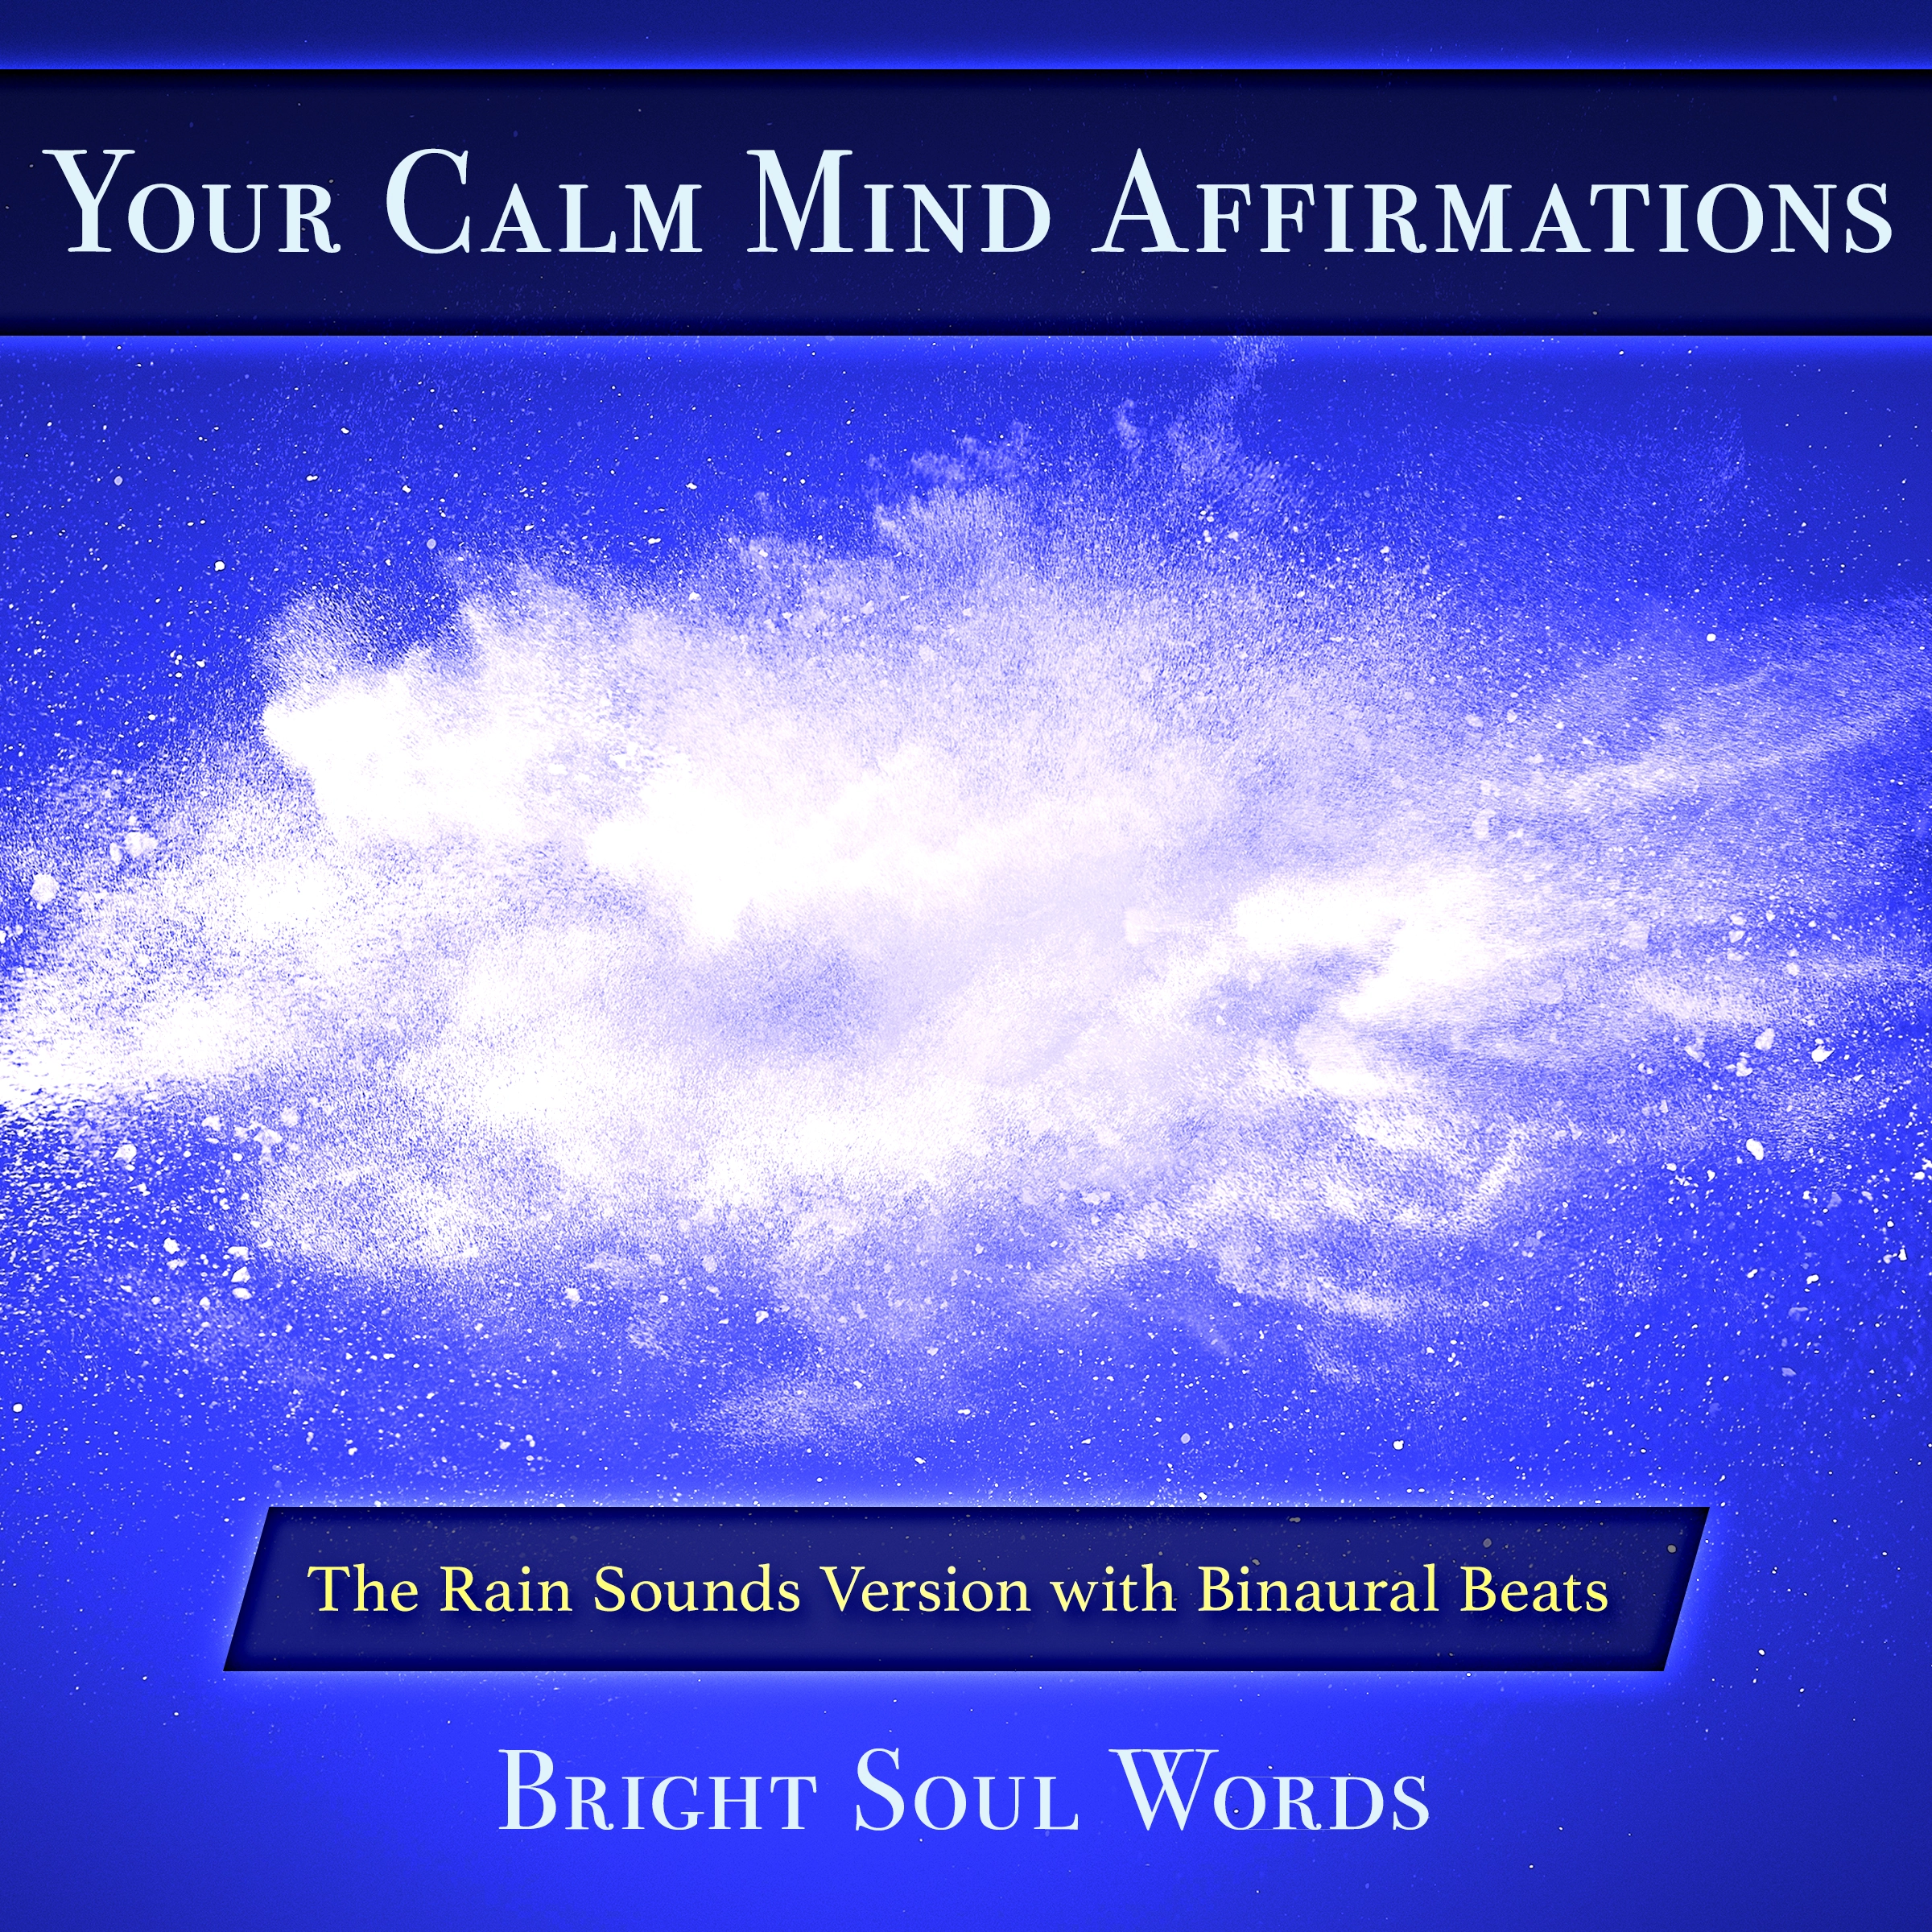 Your Calm Mind Affirmations: The Rain Sounds Version with Binaural Beats Audiobook by Bright Soul Words